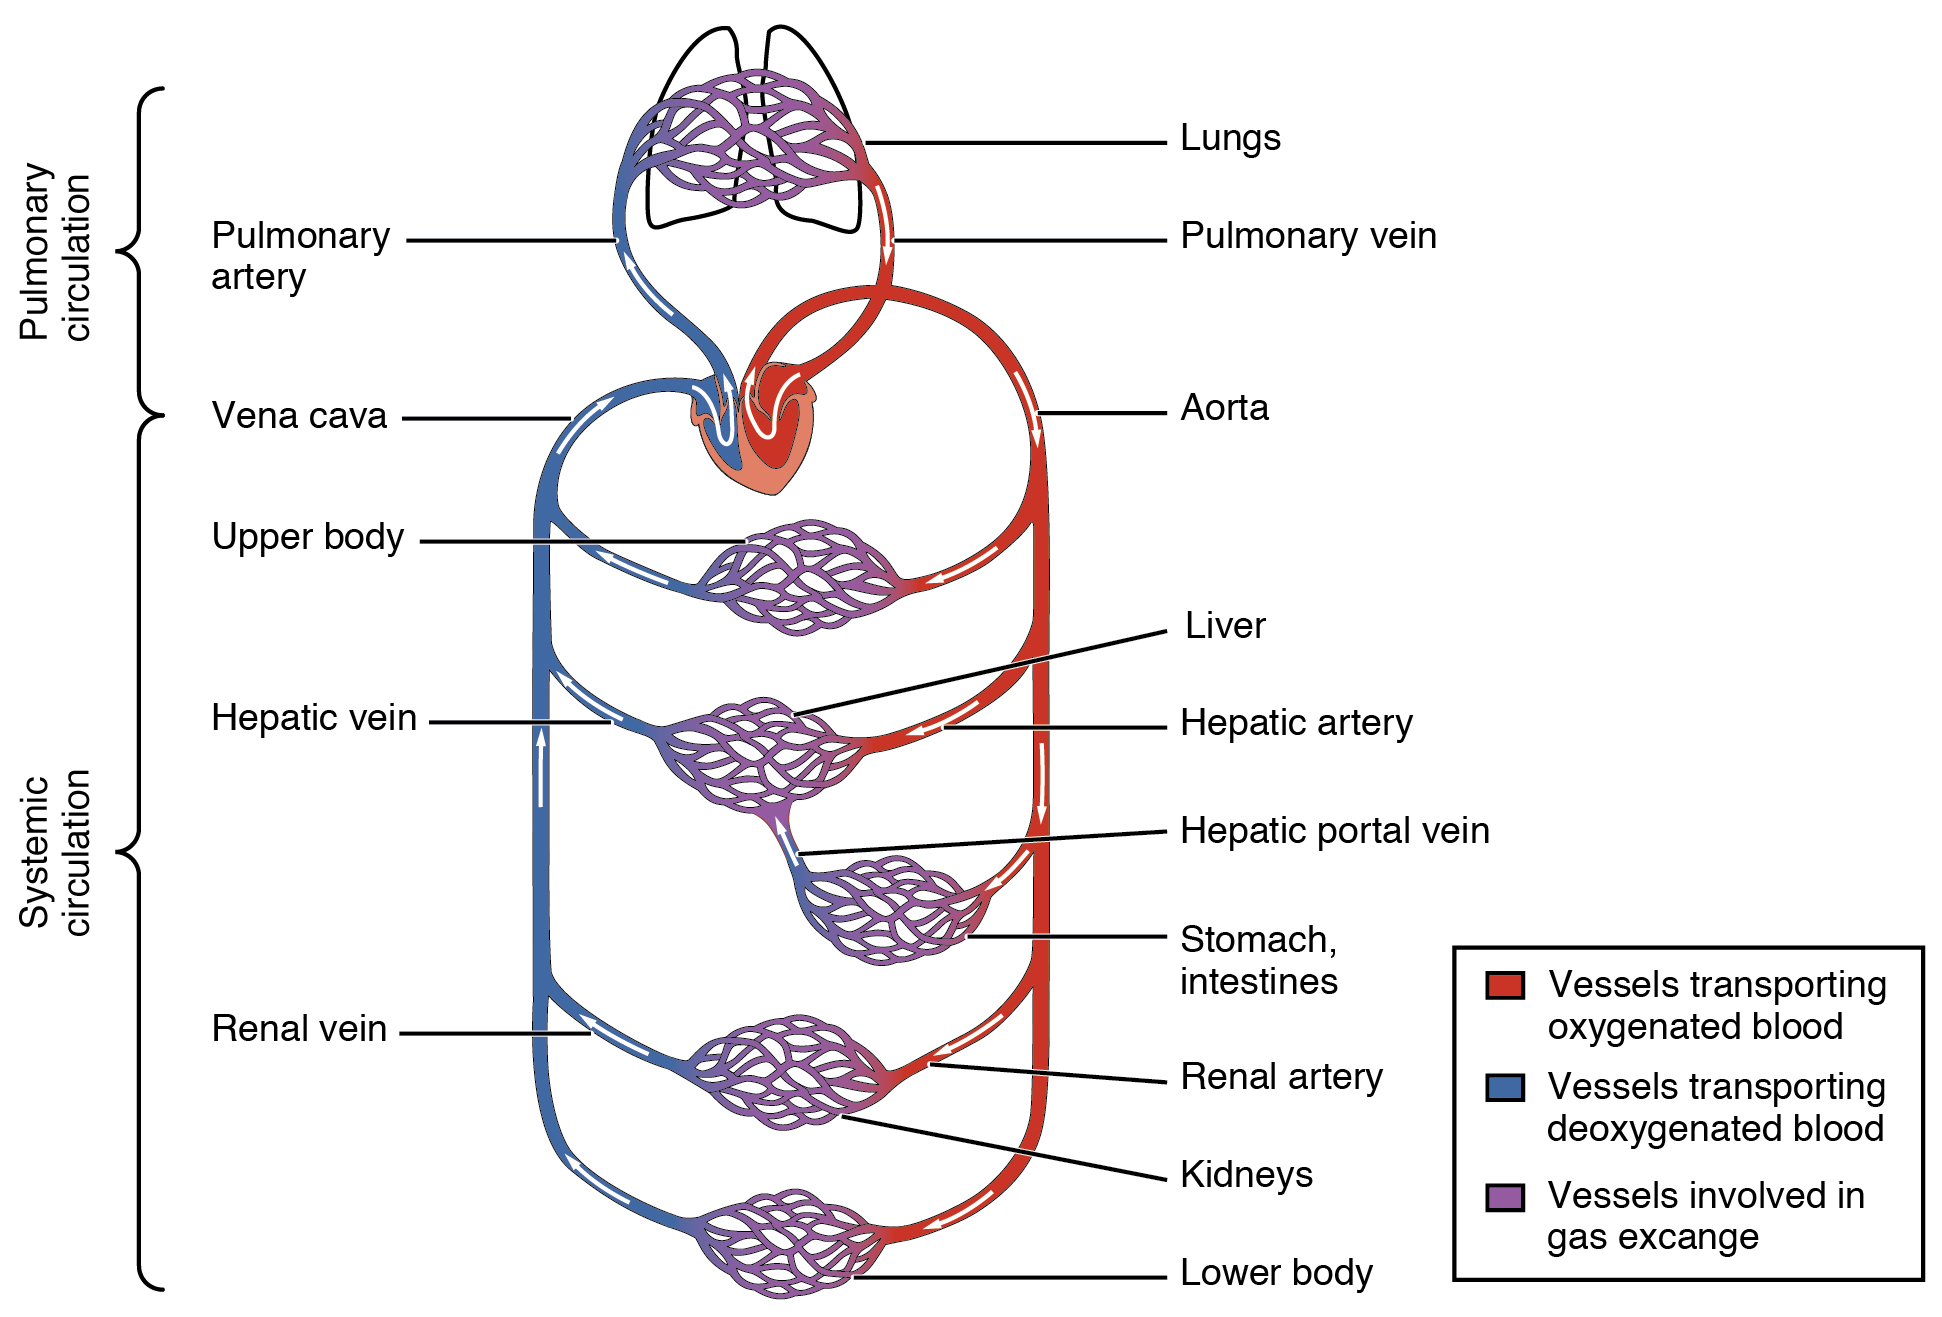 Diagram showing the circulatory system of the human body. Arteries transport oxygenated blood, veins carry deoxygenated blood, and capillaries are involved in gas exchange.